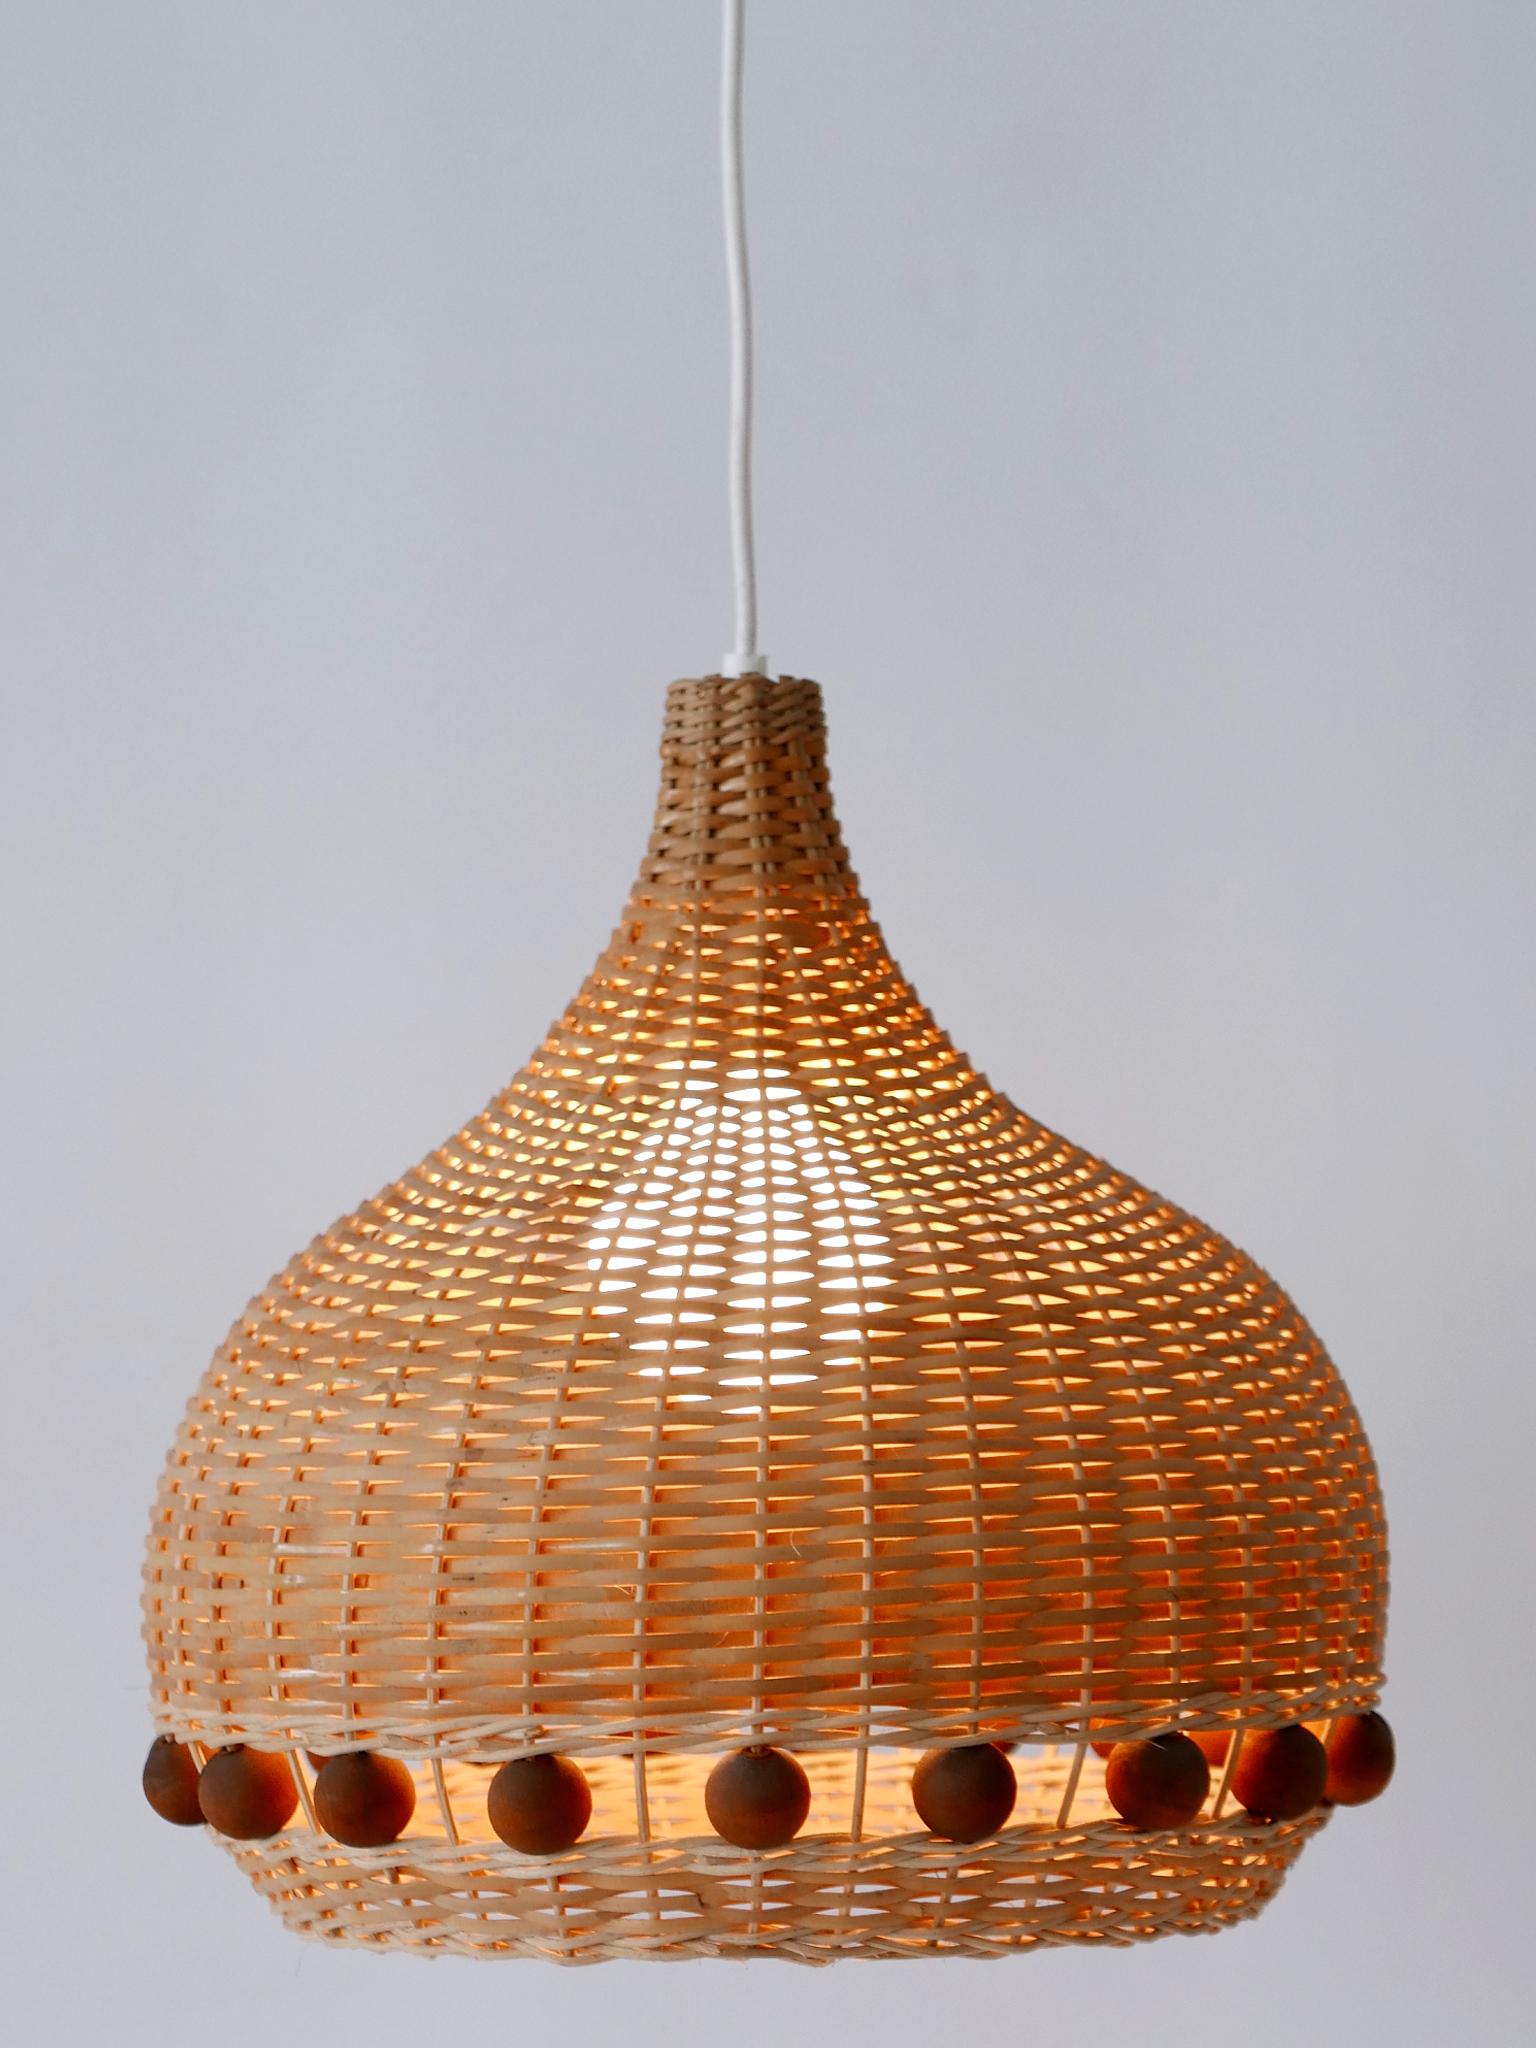 Mid-20th Century Mid-Century Modern Rattan Tulip Pendant Lamp or Hanging Light Germany 1960s For Sale